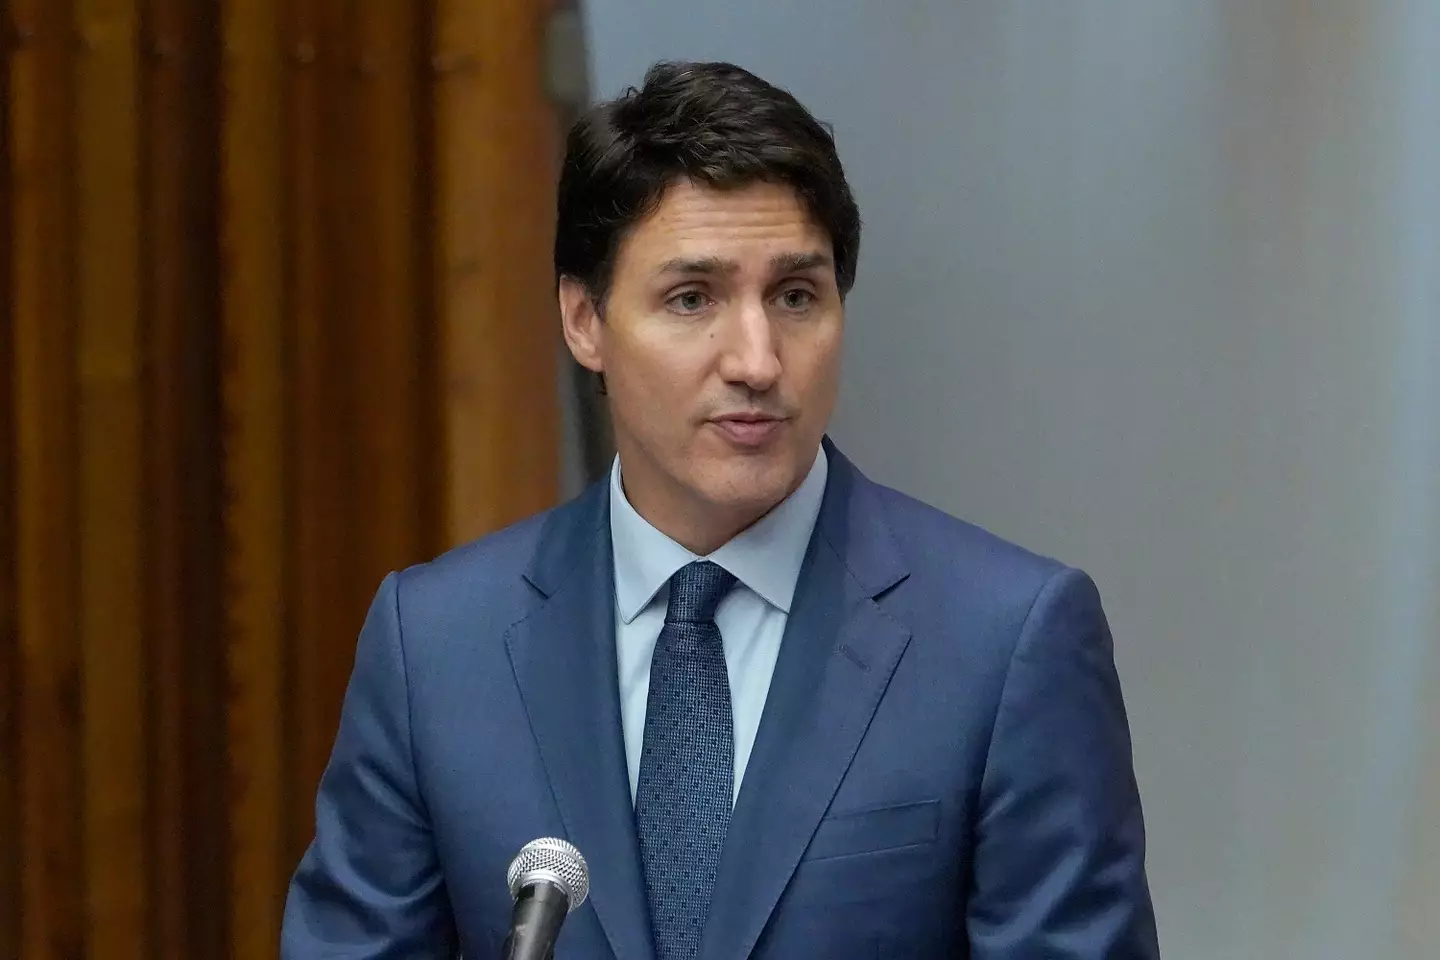 Justin Trudeau has been met with abusive comments.